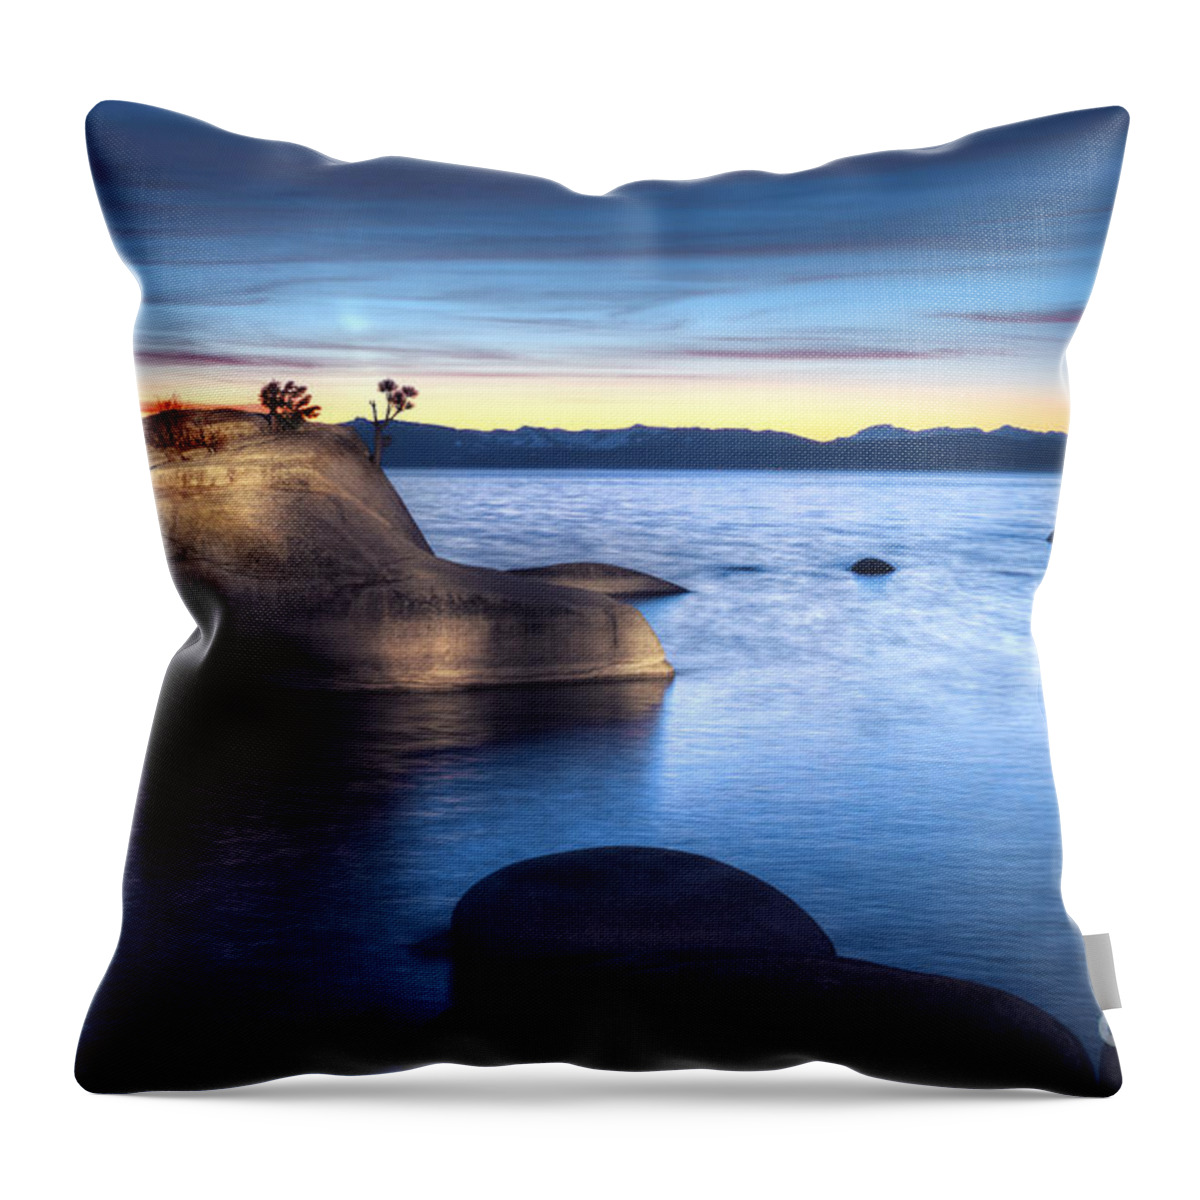 Blue Throw Pillow featuring the photograph Lake Tahoe Bonsai Rock by Dianne Phelps